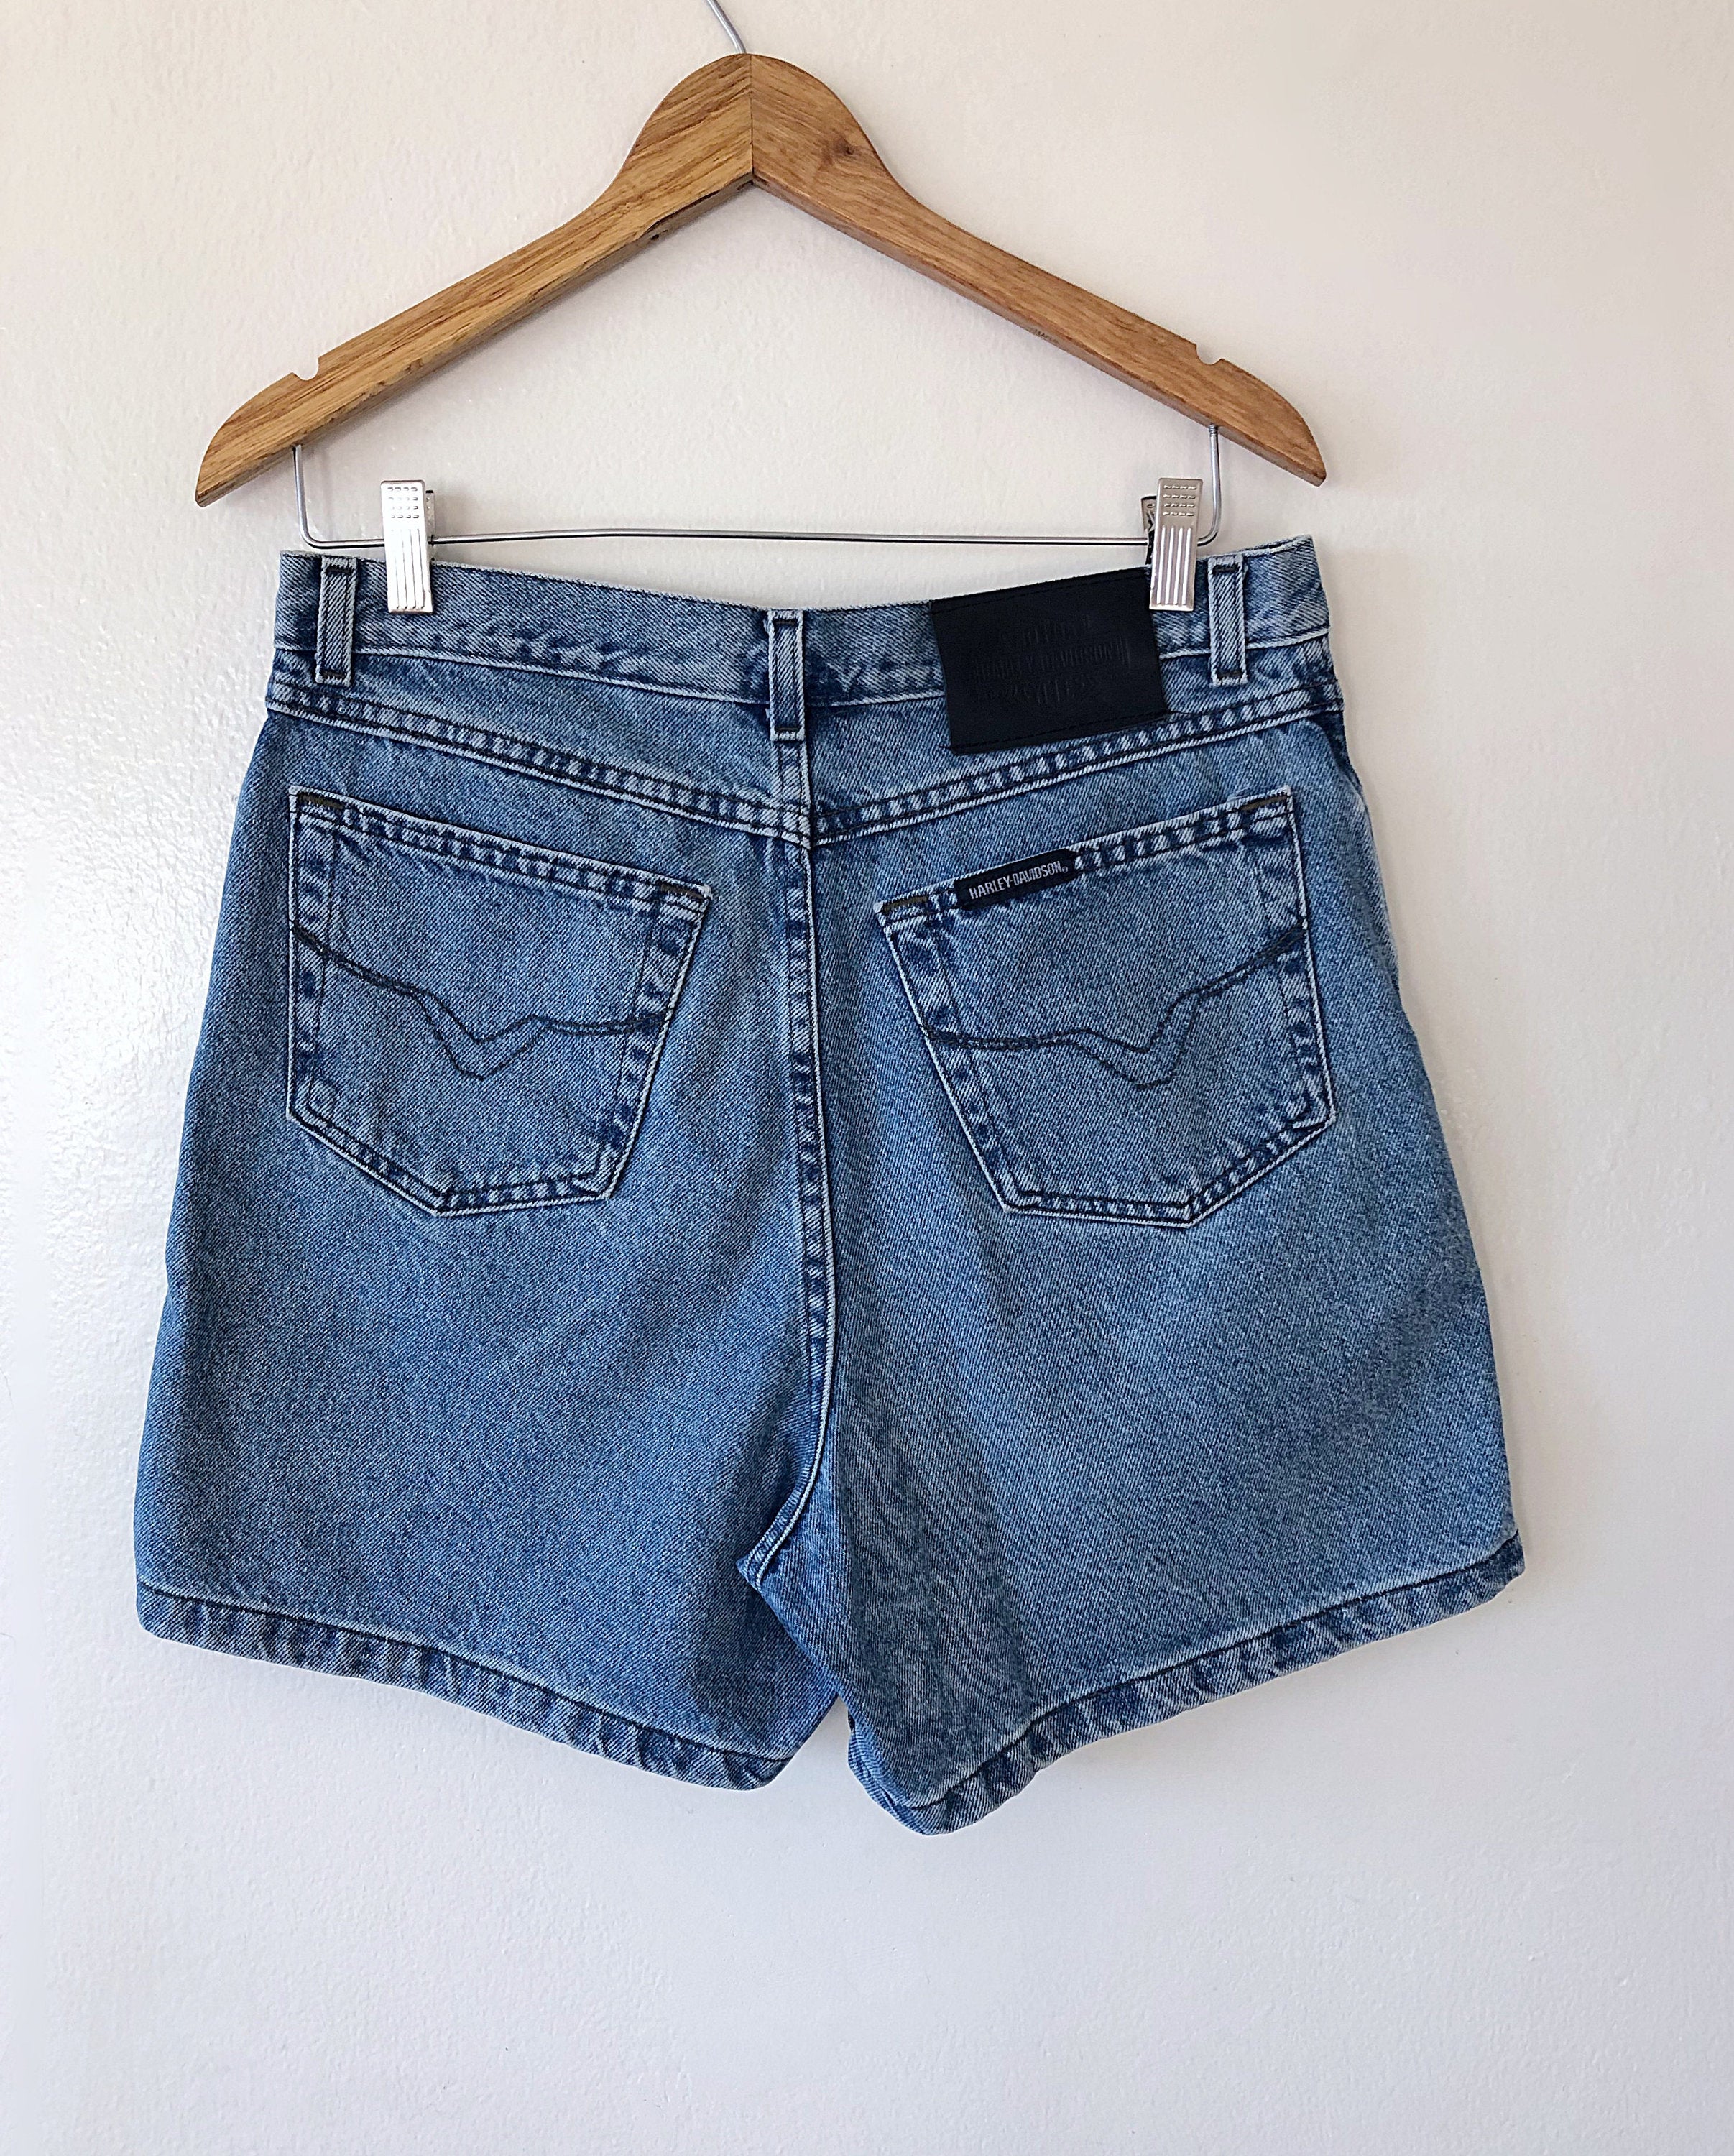 Vintage 90’s Motorcycle High Waisted Biker Babe Jean Shorts by Harley ...